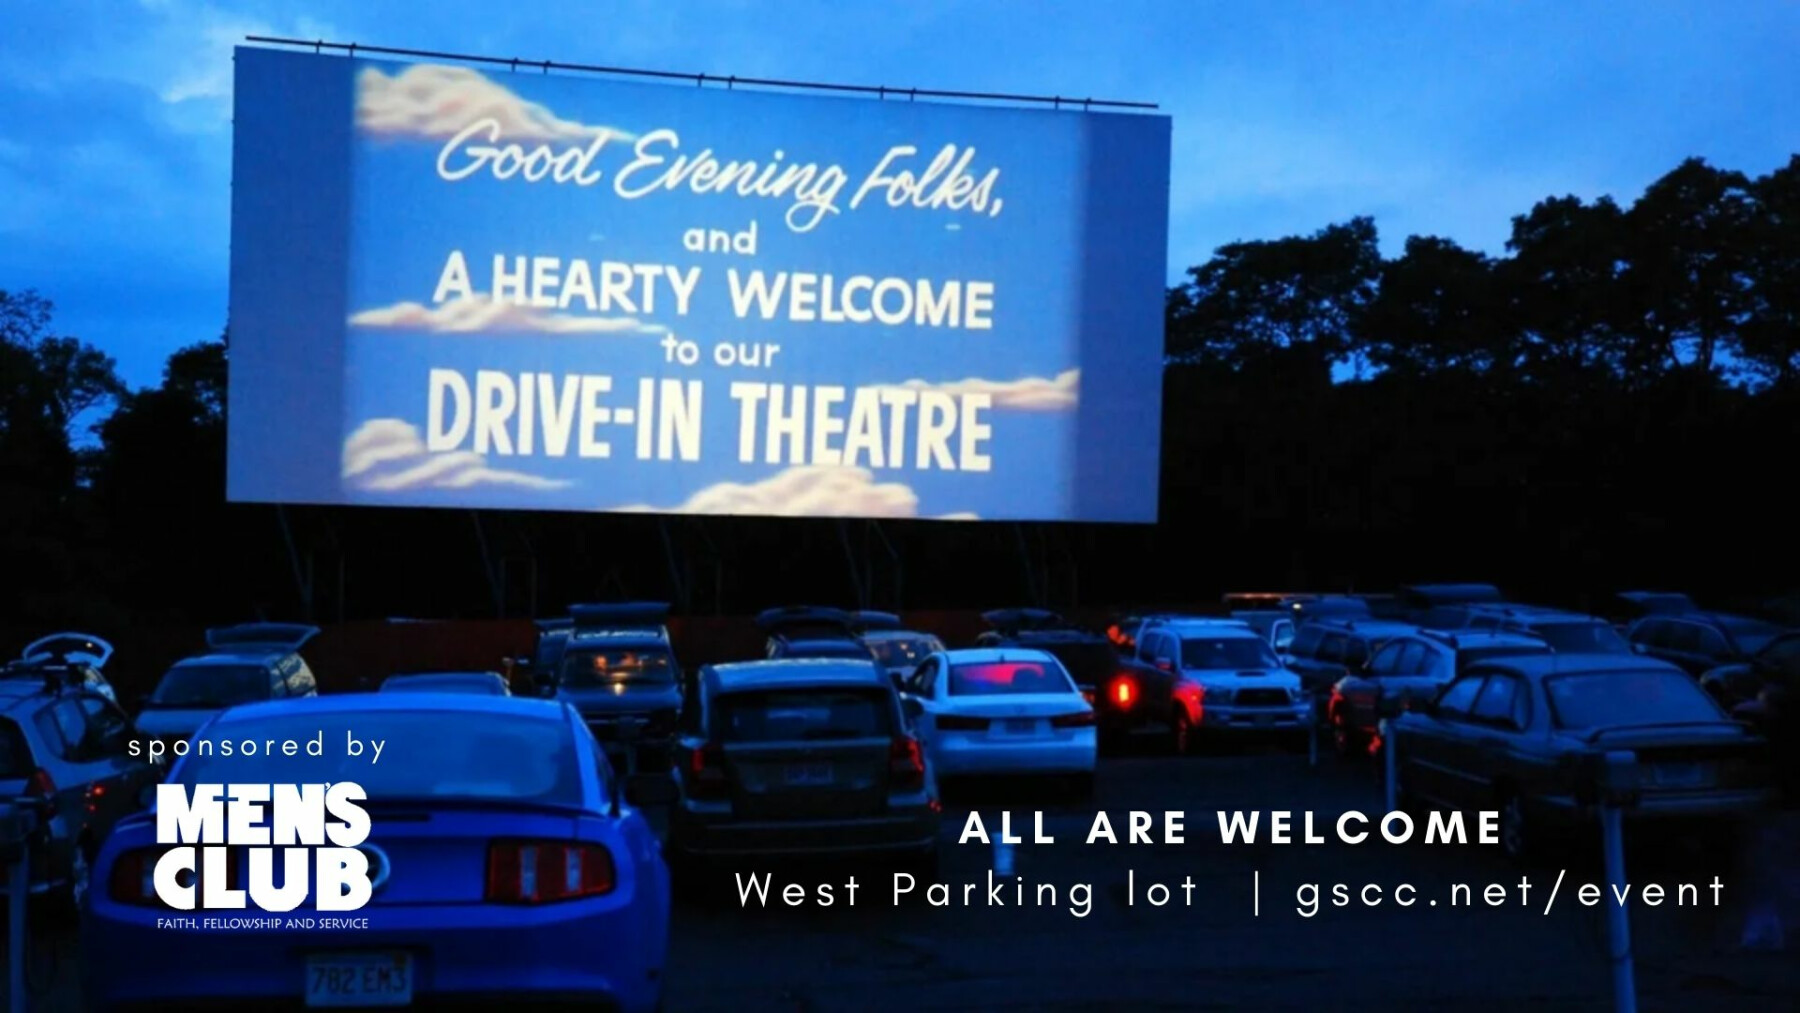 Drive-in movie sponsored by the Men's Club